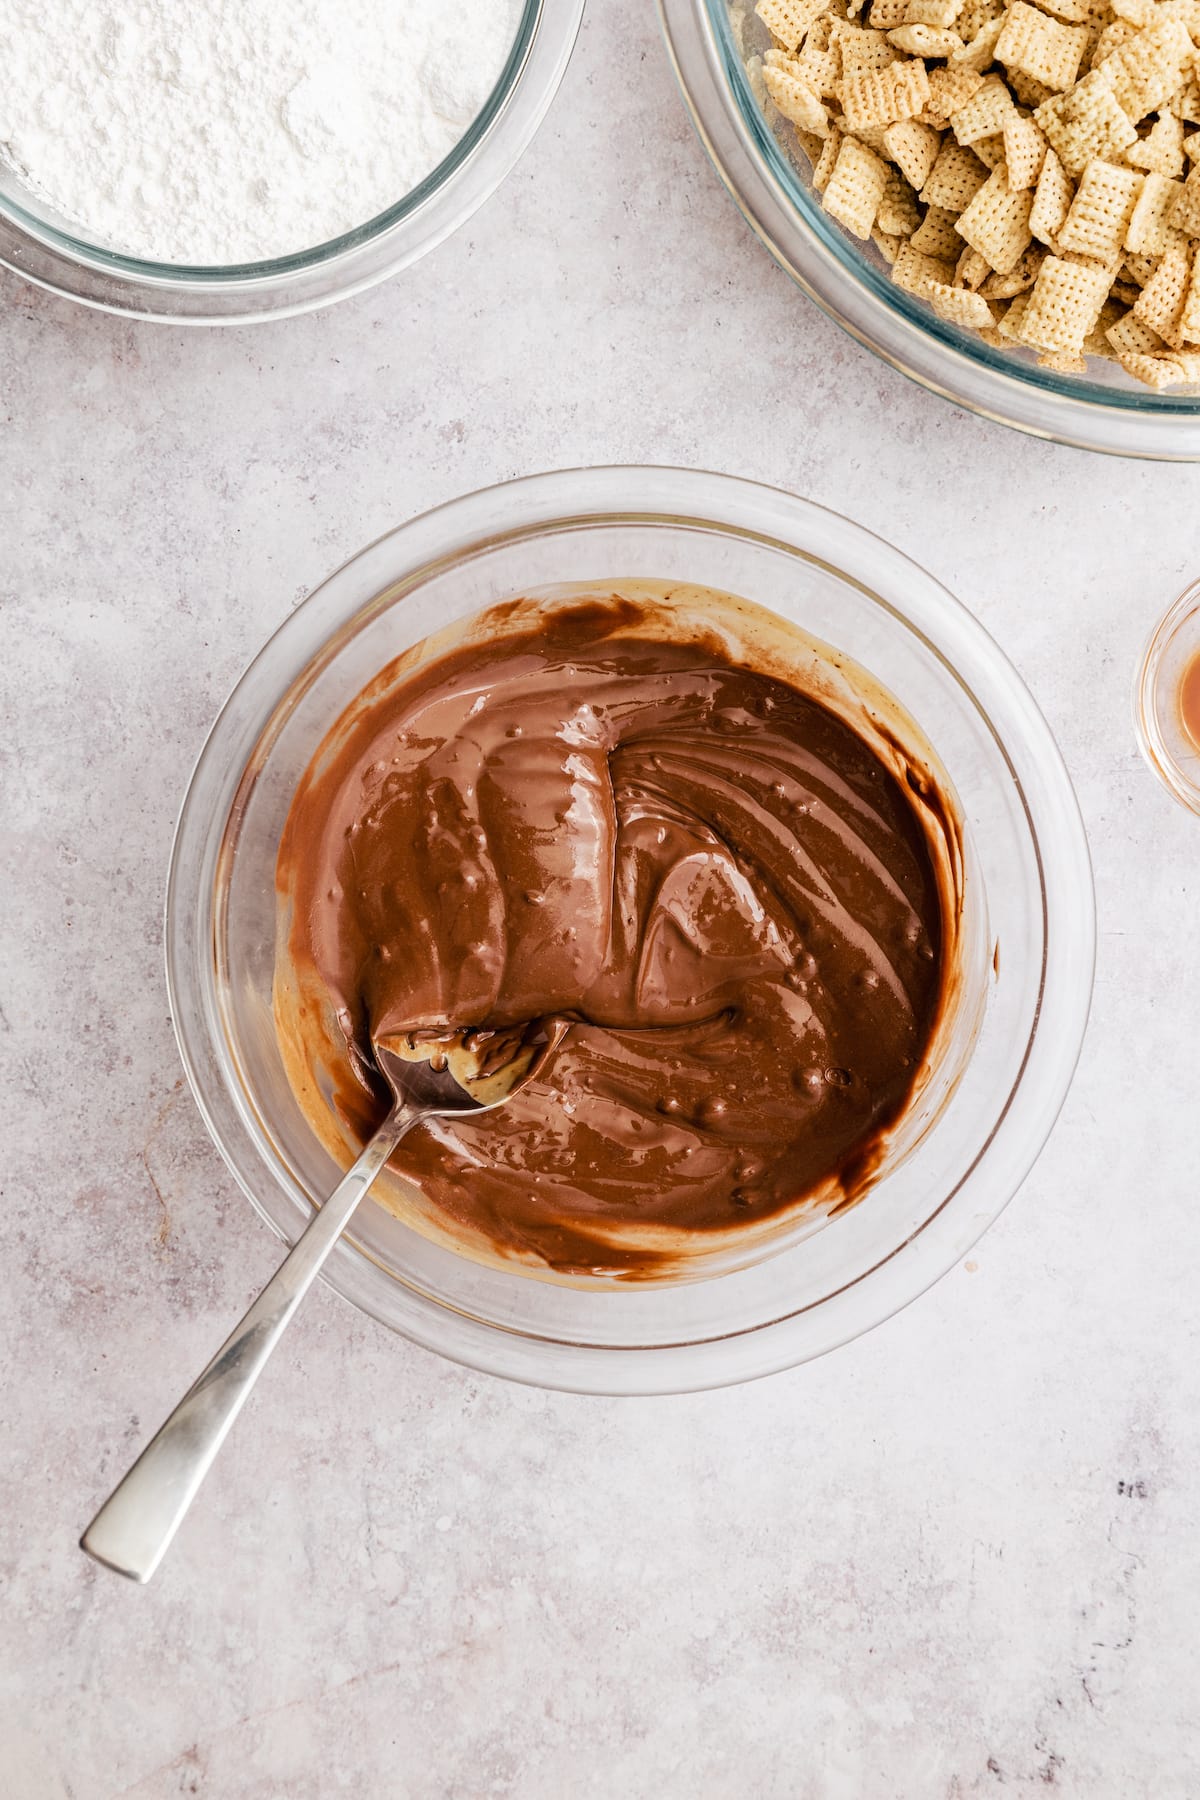 Chocolate and peanut butter melted together in a glass mixing bowl.